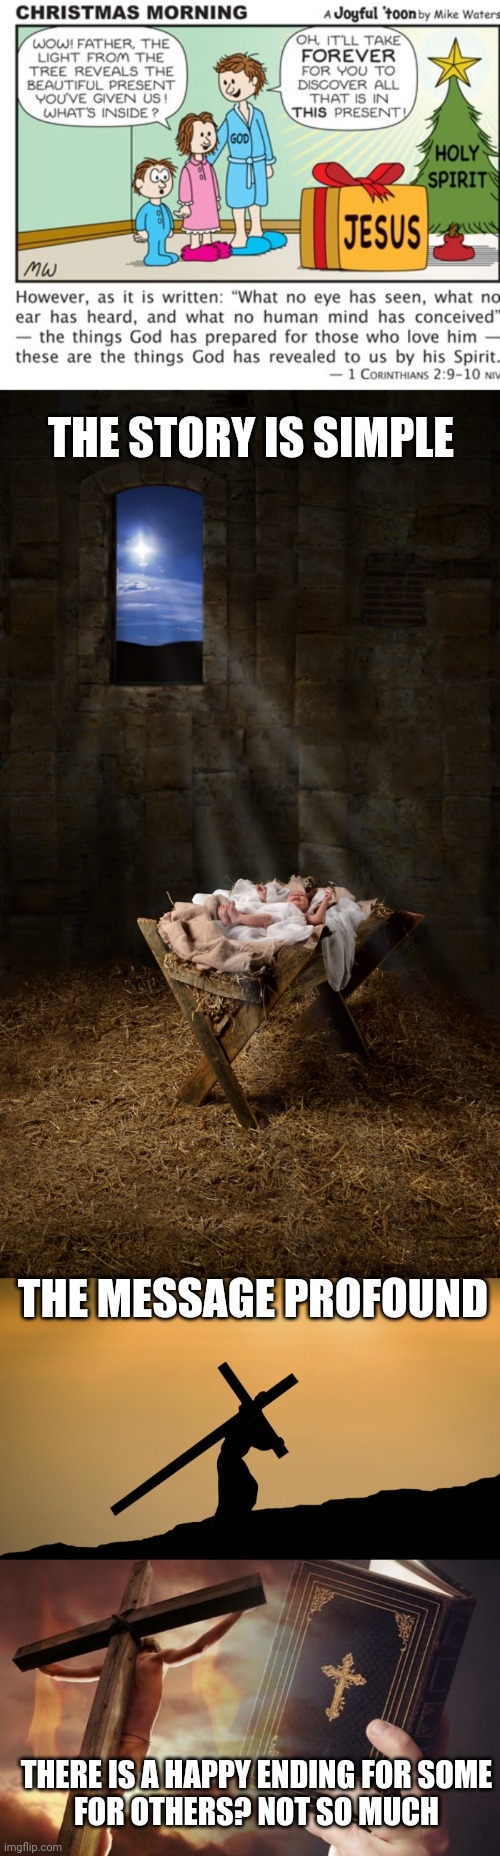 THE STORY IS SIMPLE; THE MESSAGE PROFOUND; THERE IS A HAPPY ENDING FOR SOME
FOR OTHERS? NOT SO MUCH | image tagged in christmas morn,infant jesus,jesus crossfit,jesus cross bible | made w/ Imgflip meme maker